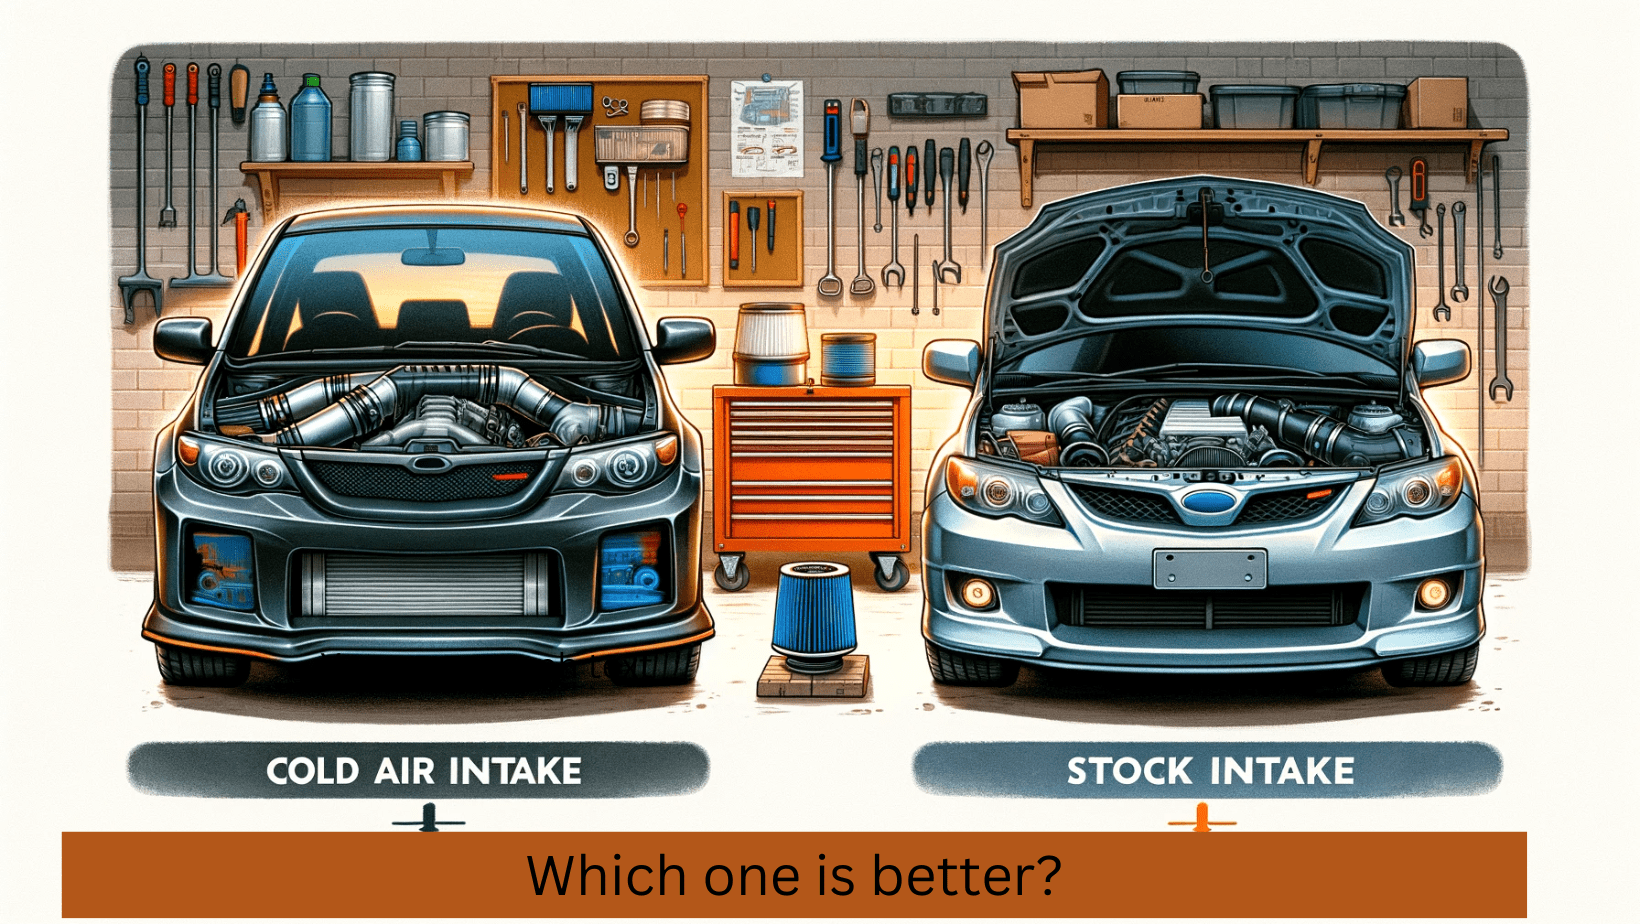 Cold air vs stock intakes: you choose